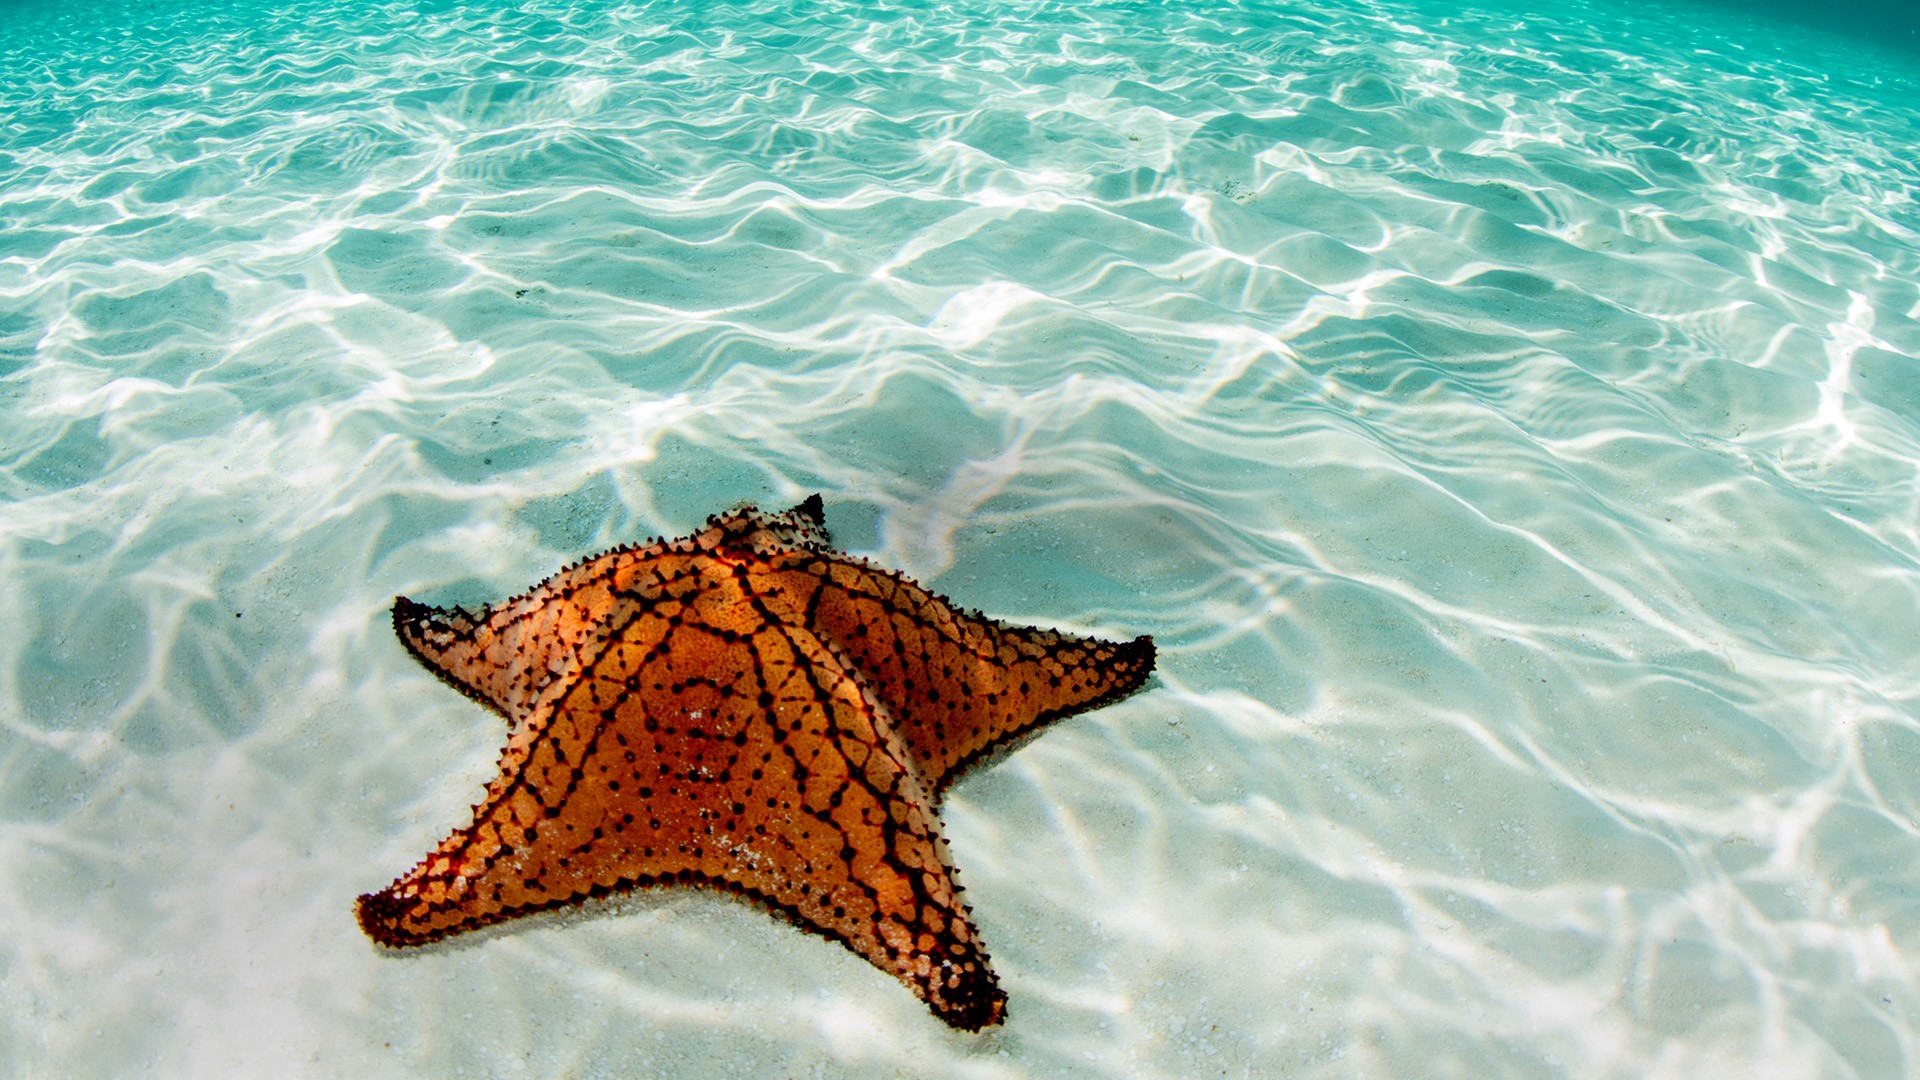 West Indian sea star at the coast of Belize, Mesoamerican Barrier Reef ...